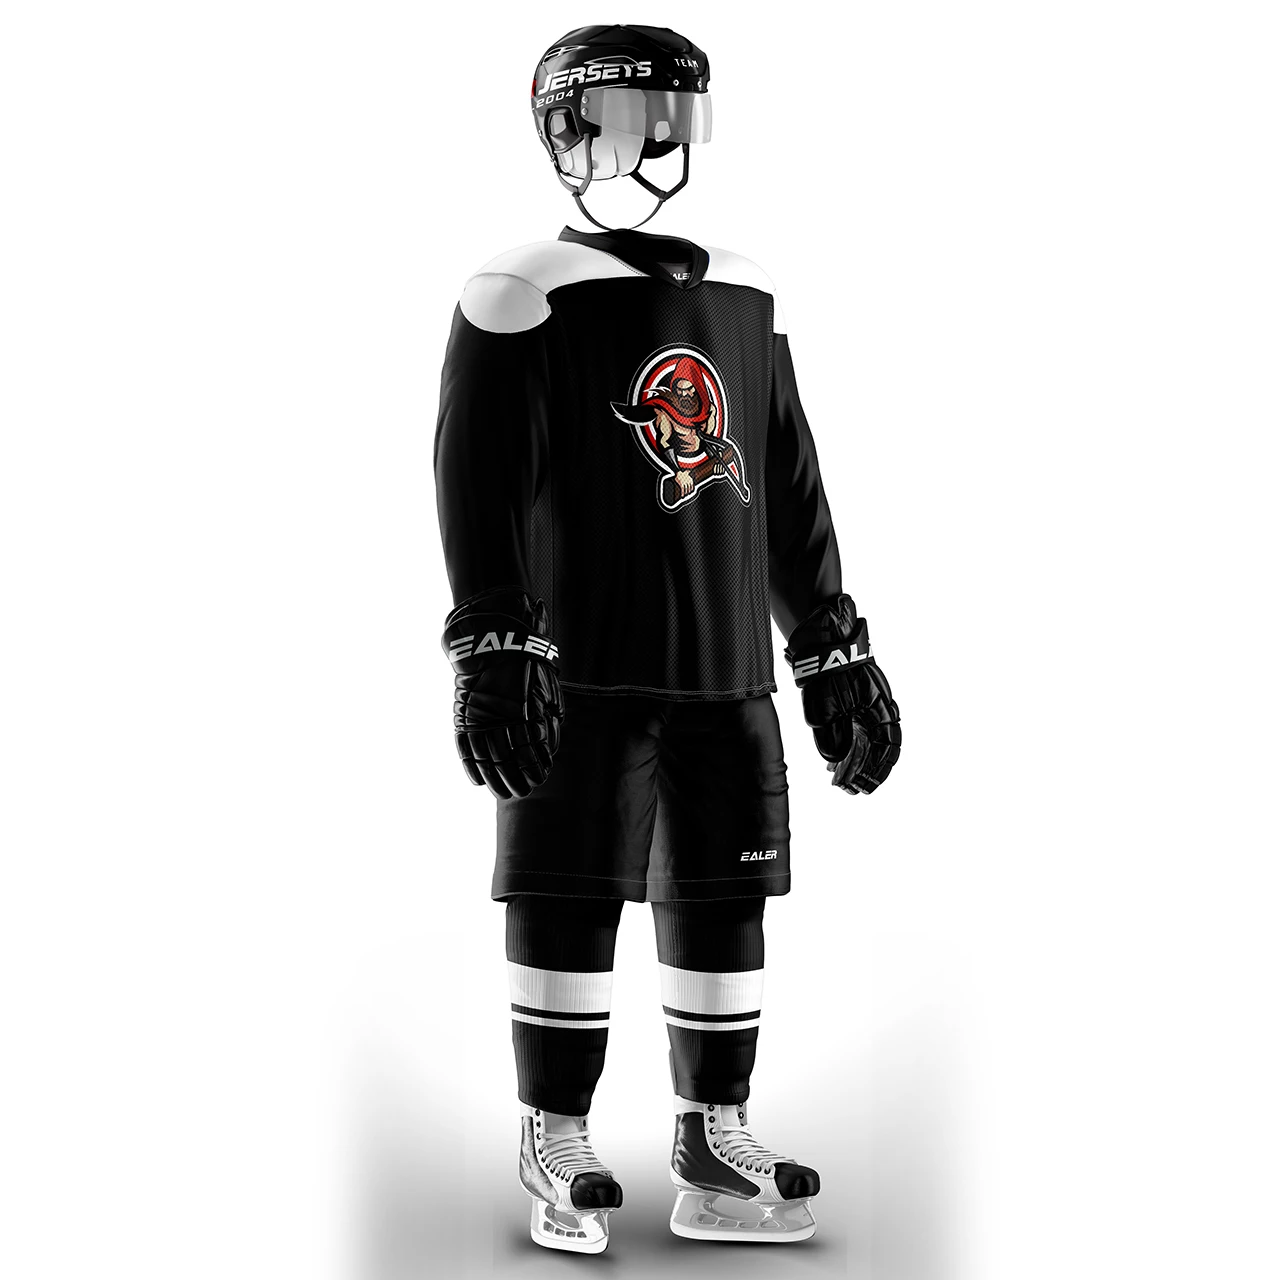 COLDINDOOR Free Shipping Ice Hockey Training Jerseys Vintage Sport Cheap high quality H6100